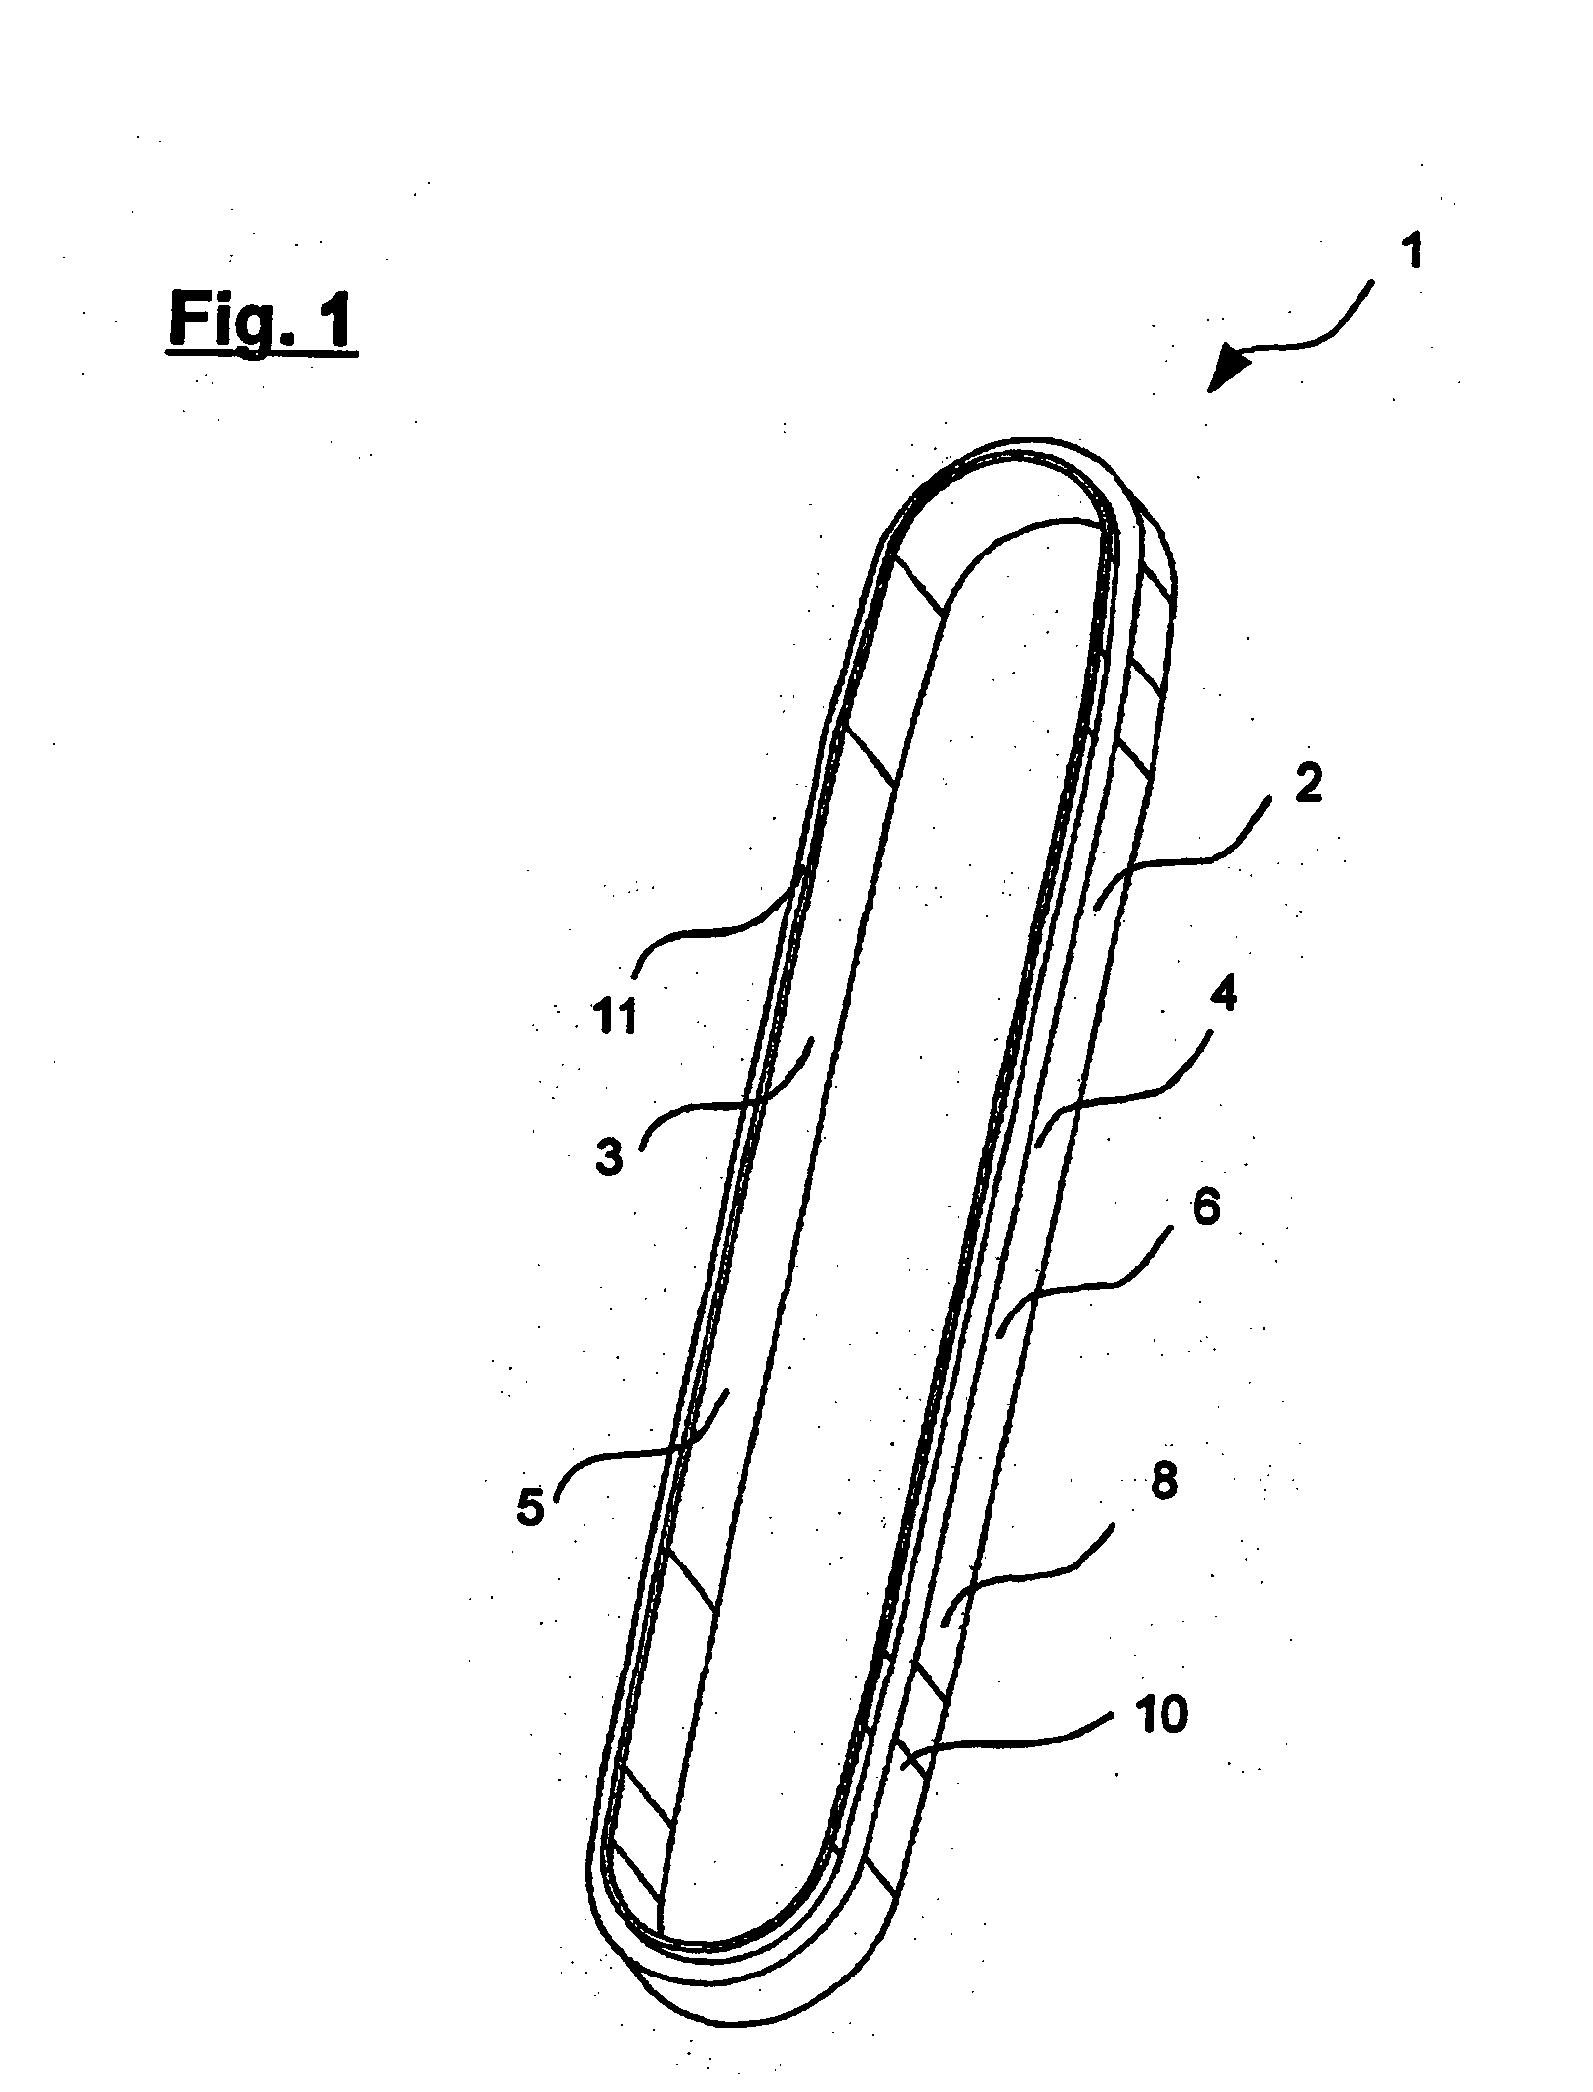 Method for cleaning surfaces, in particular glass panes